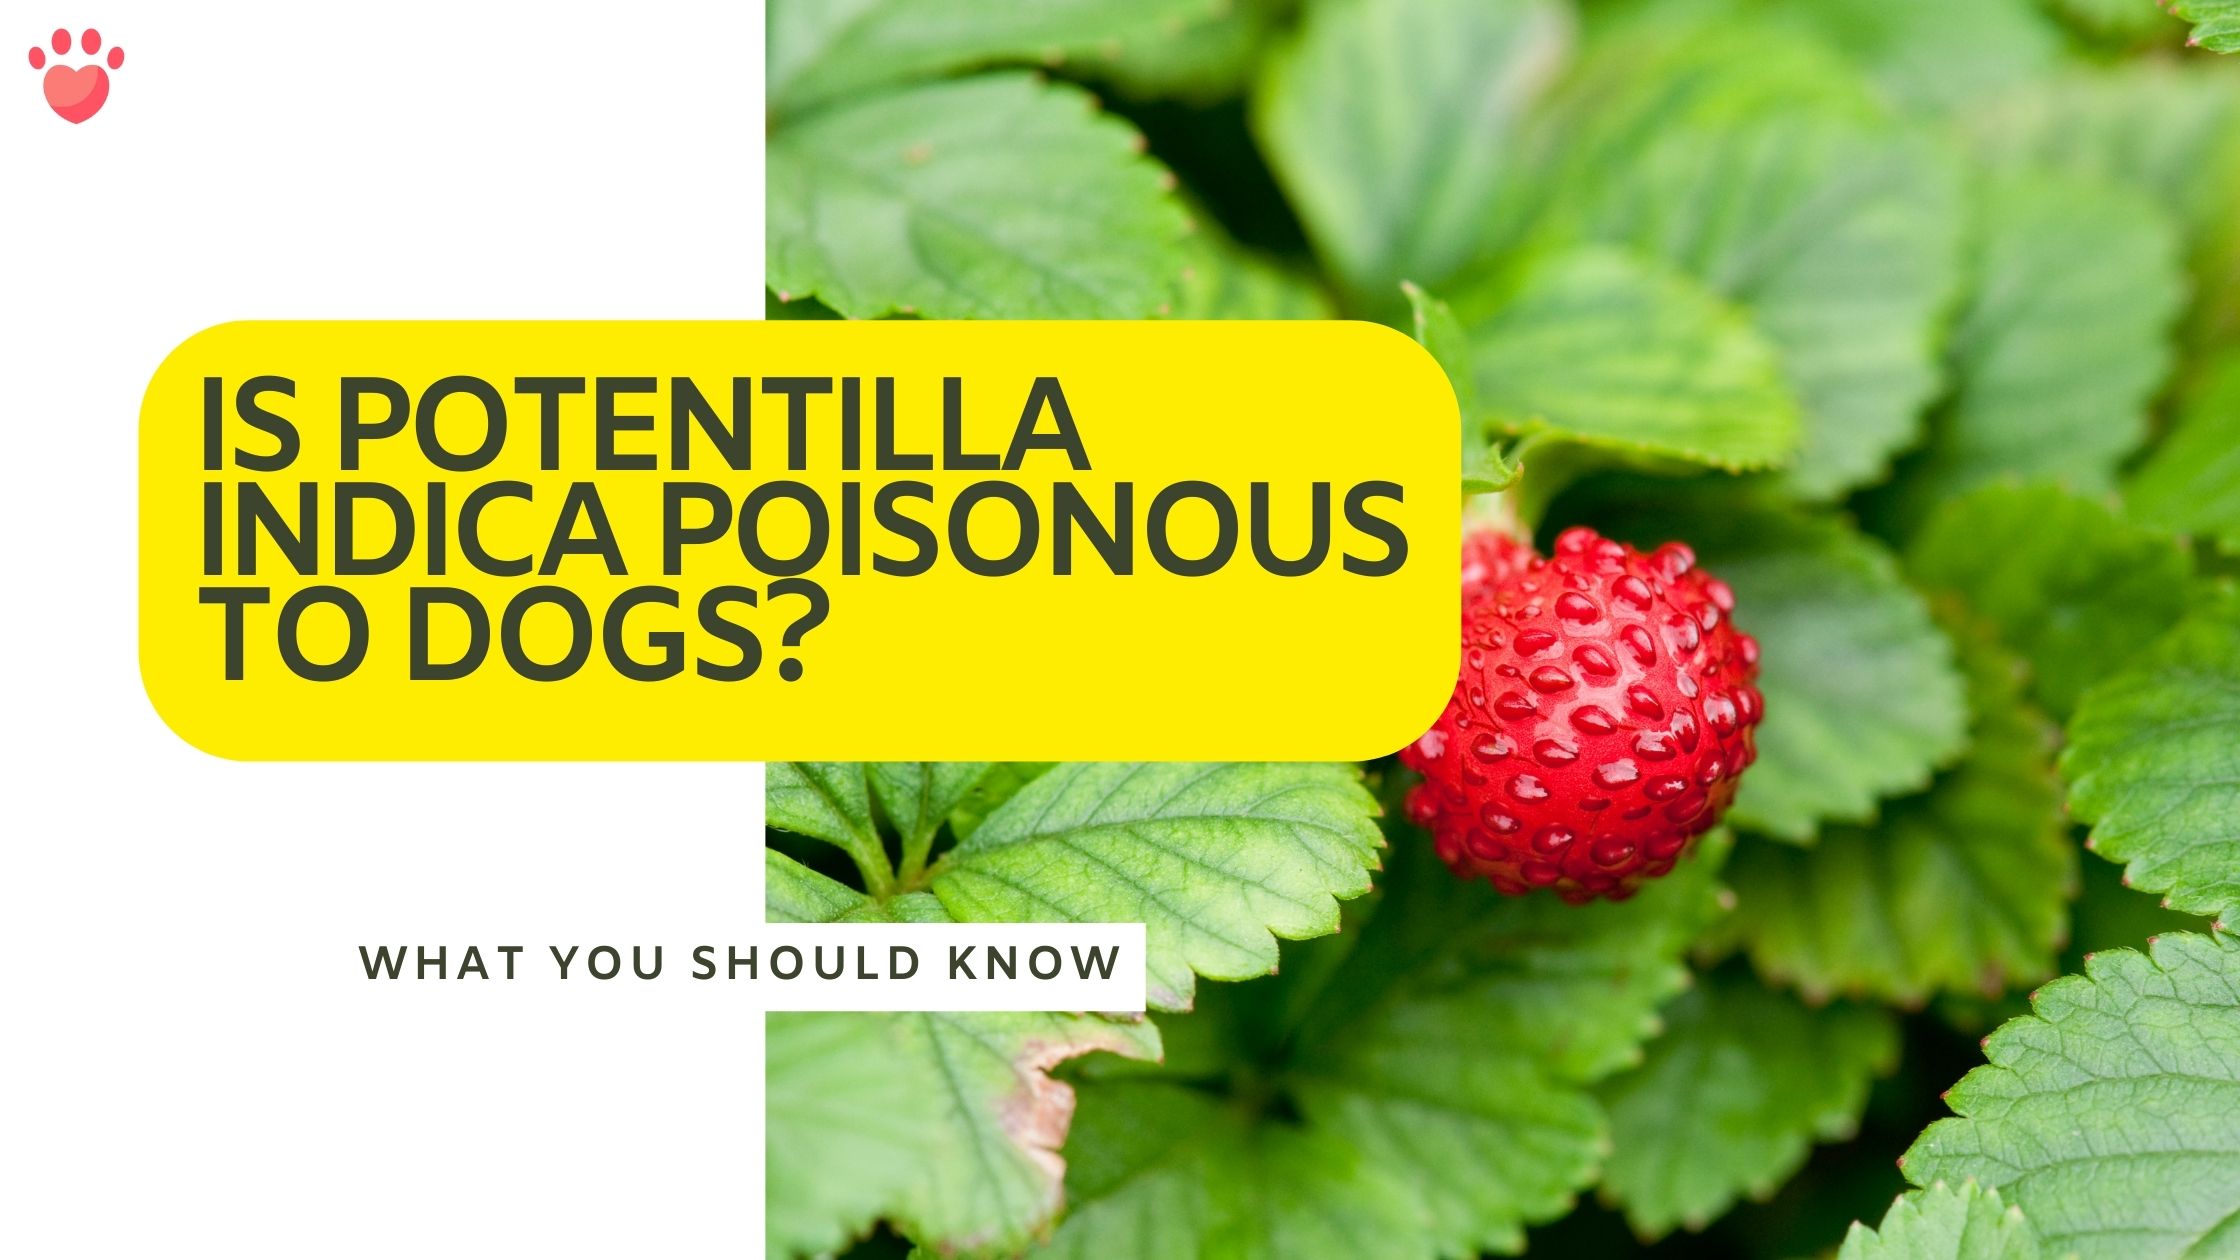 Is Potentilla Indica poisonous to dogs